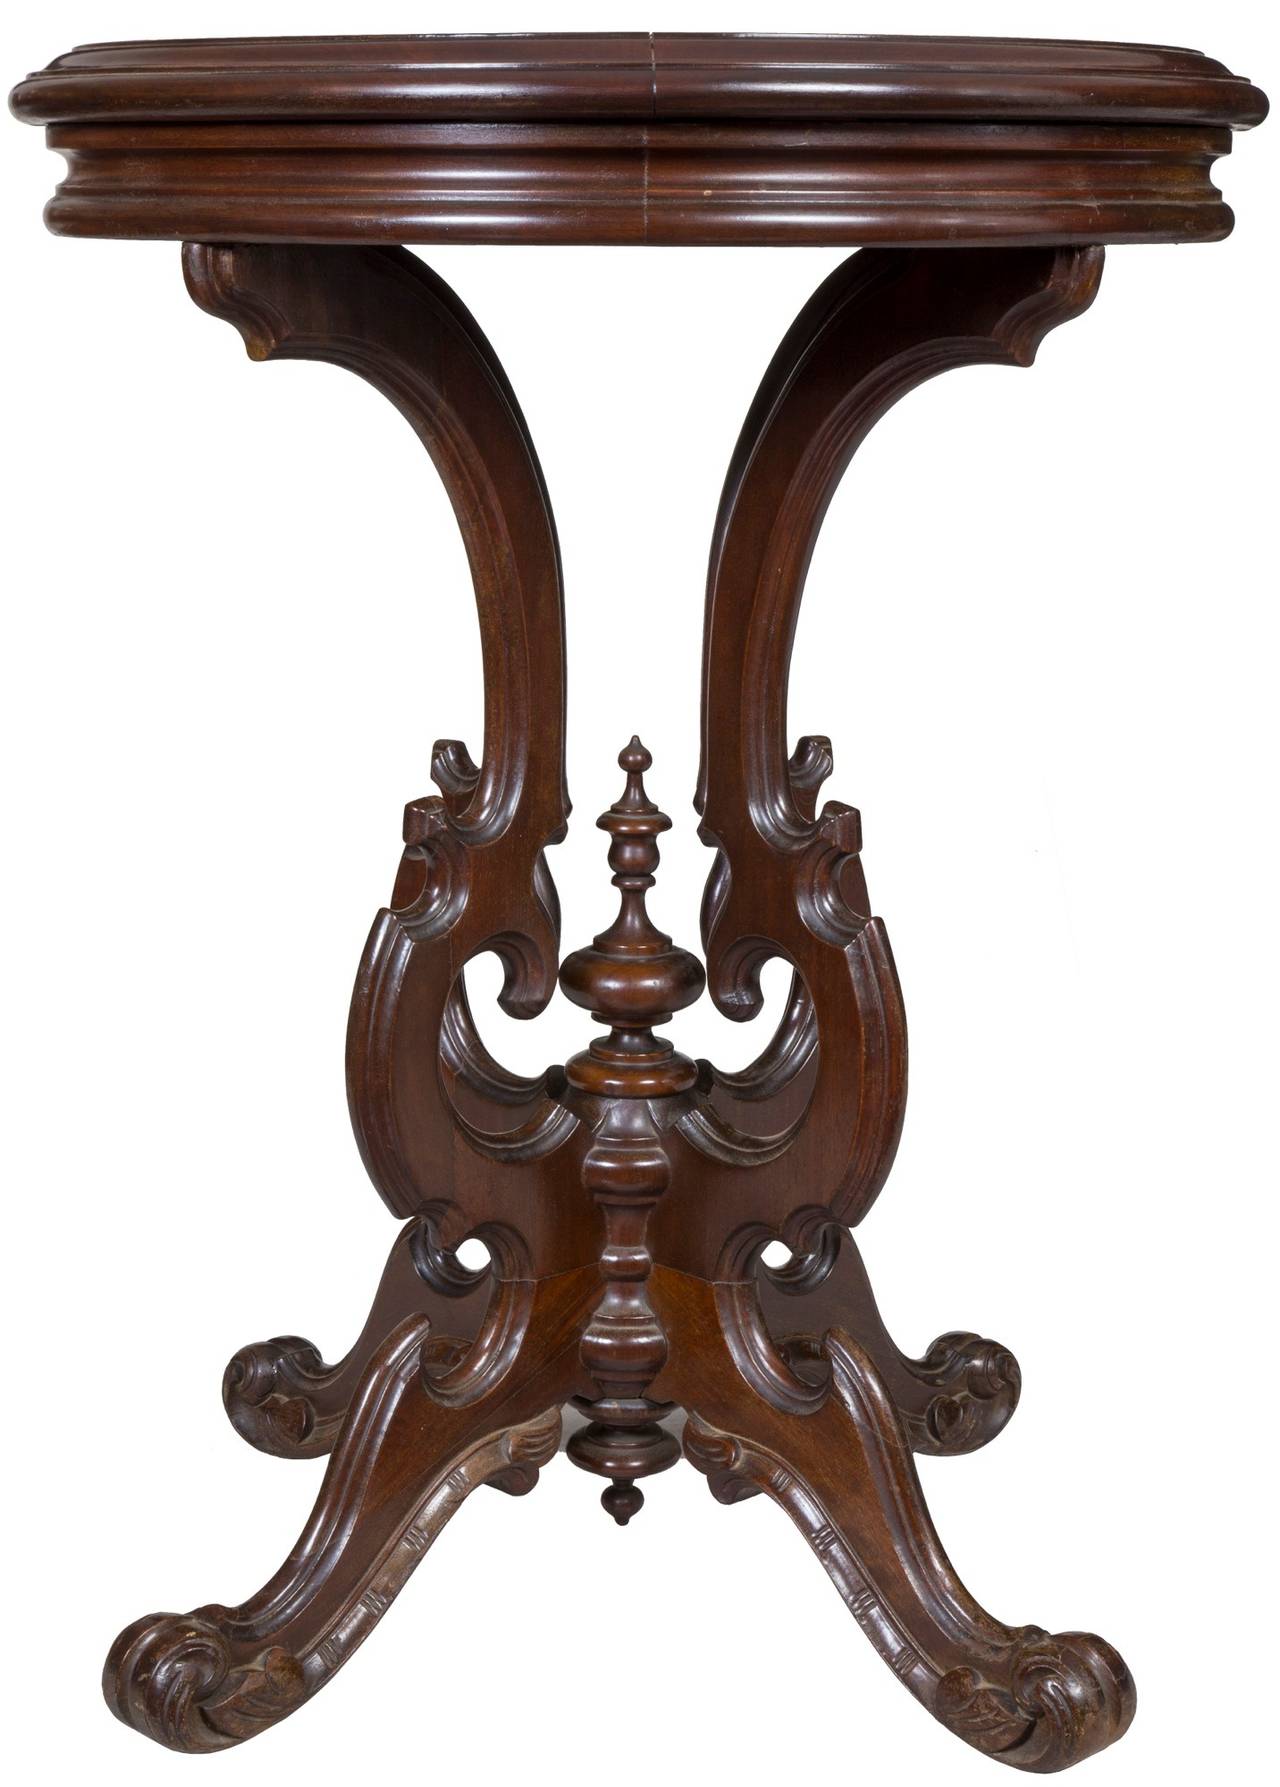 This stand has a magnificent reverse painting that retains its brilliant color, and the lyre, with flowers at its base is a real standout. The walnut table is solid, and the turnings, both top and bottom are truly magnificent, and indicate a high